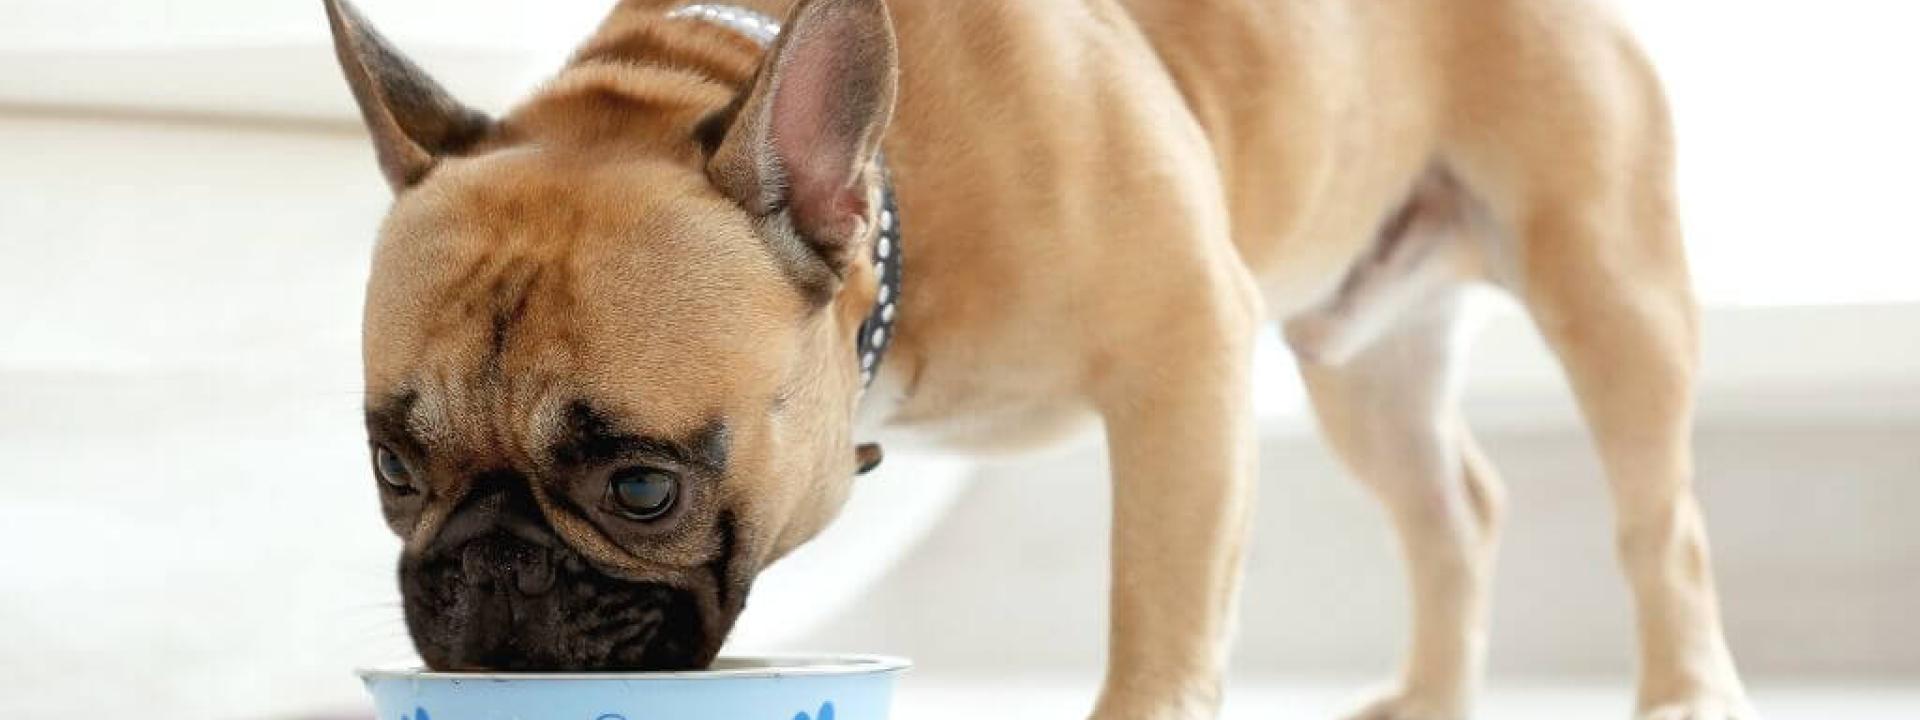 Dog eating out of a bowl.